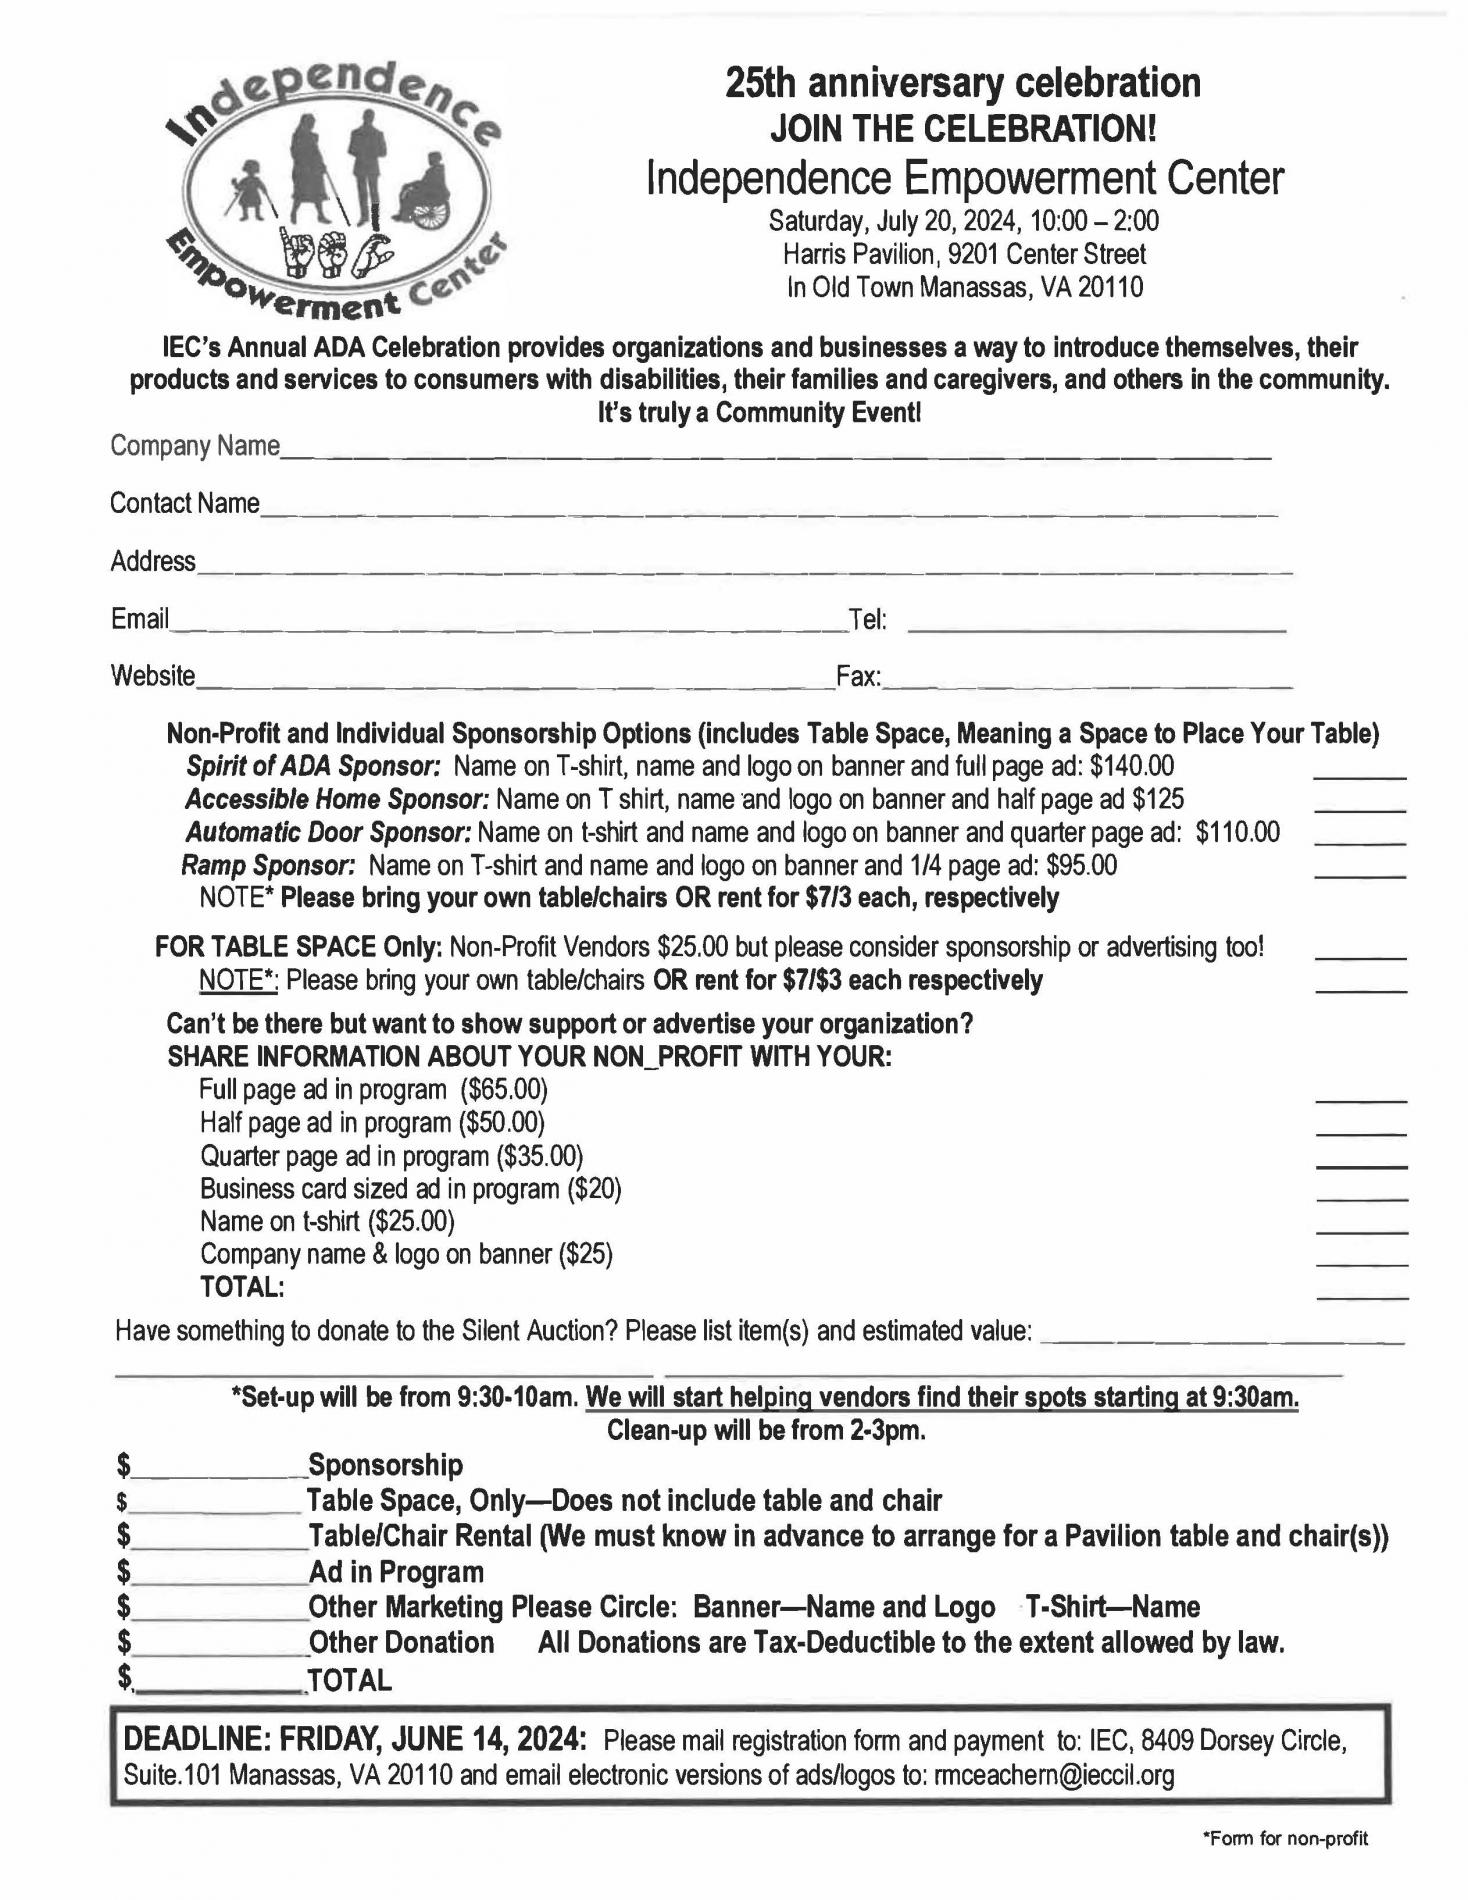 Independence Empowerment Center Application